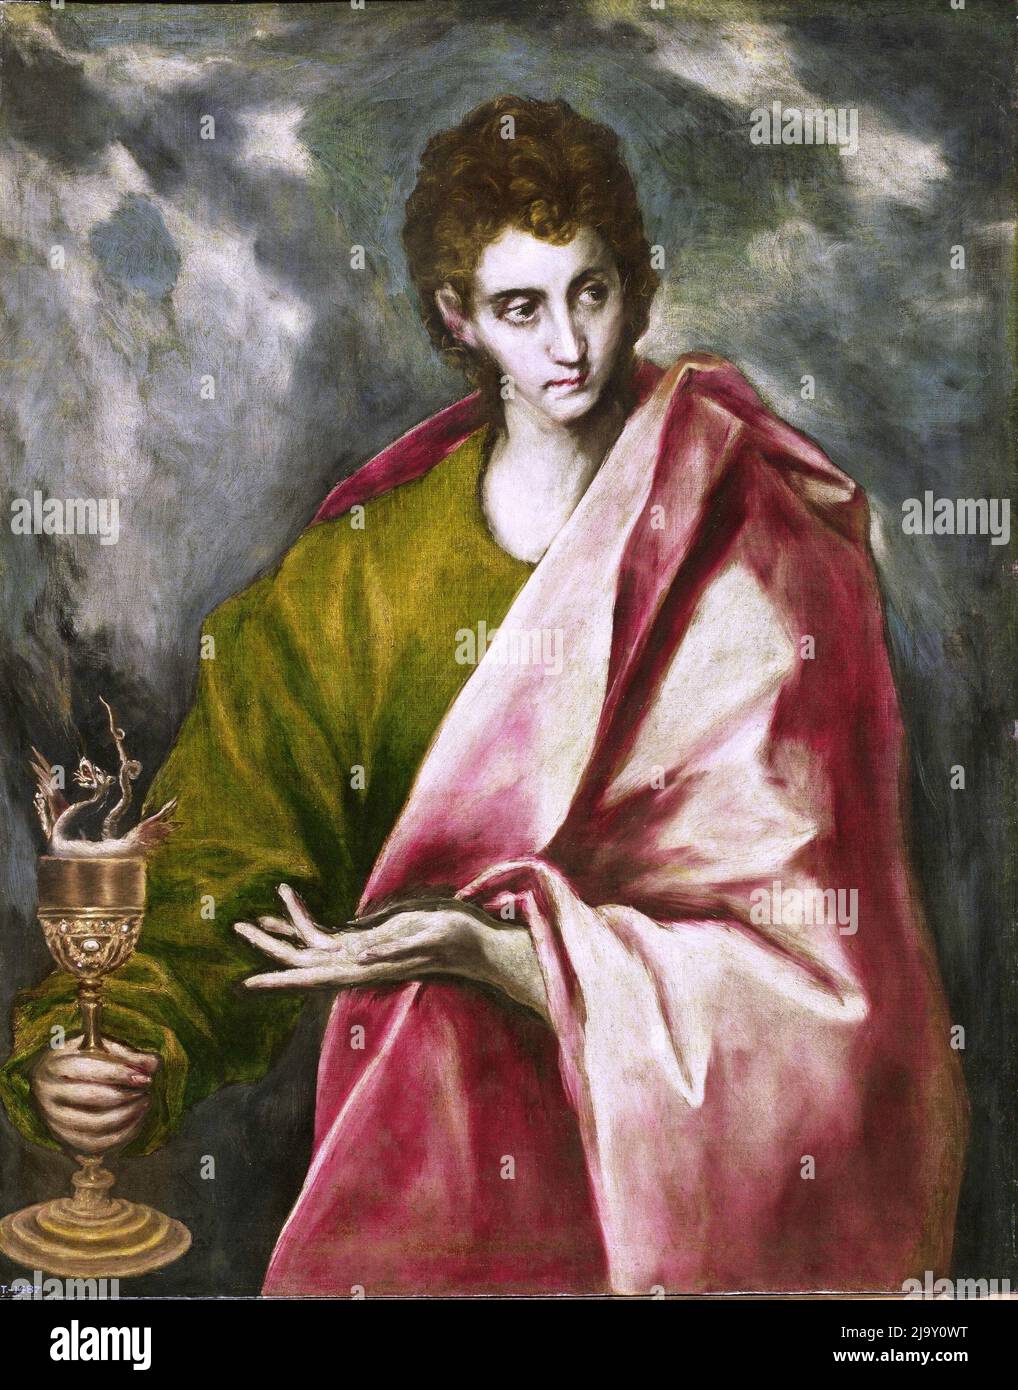 Saint John and the Poisoned Cup by El Greco, Stock Photo